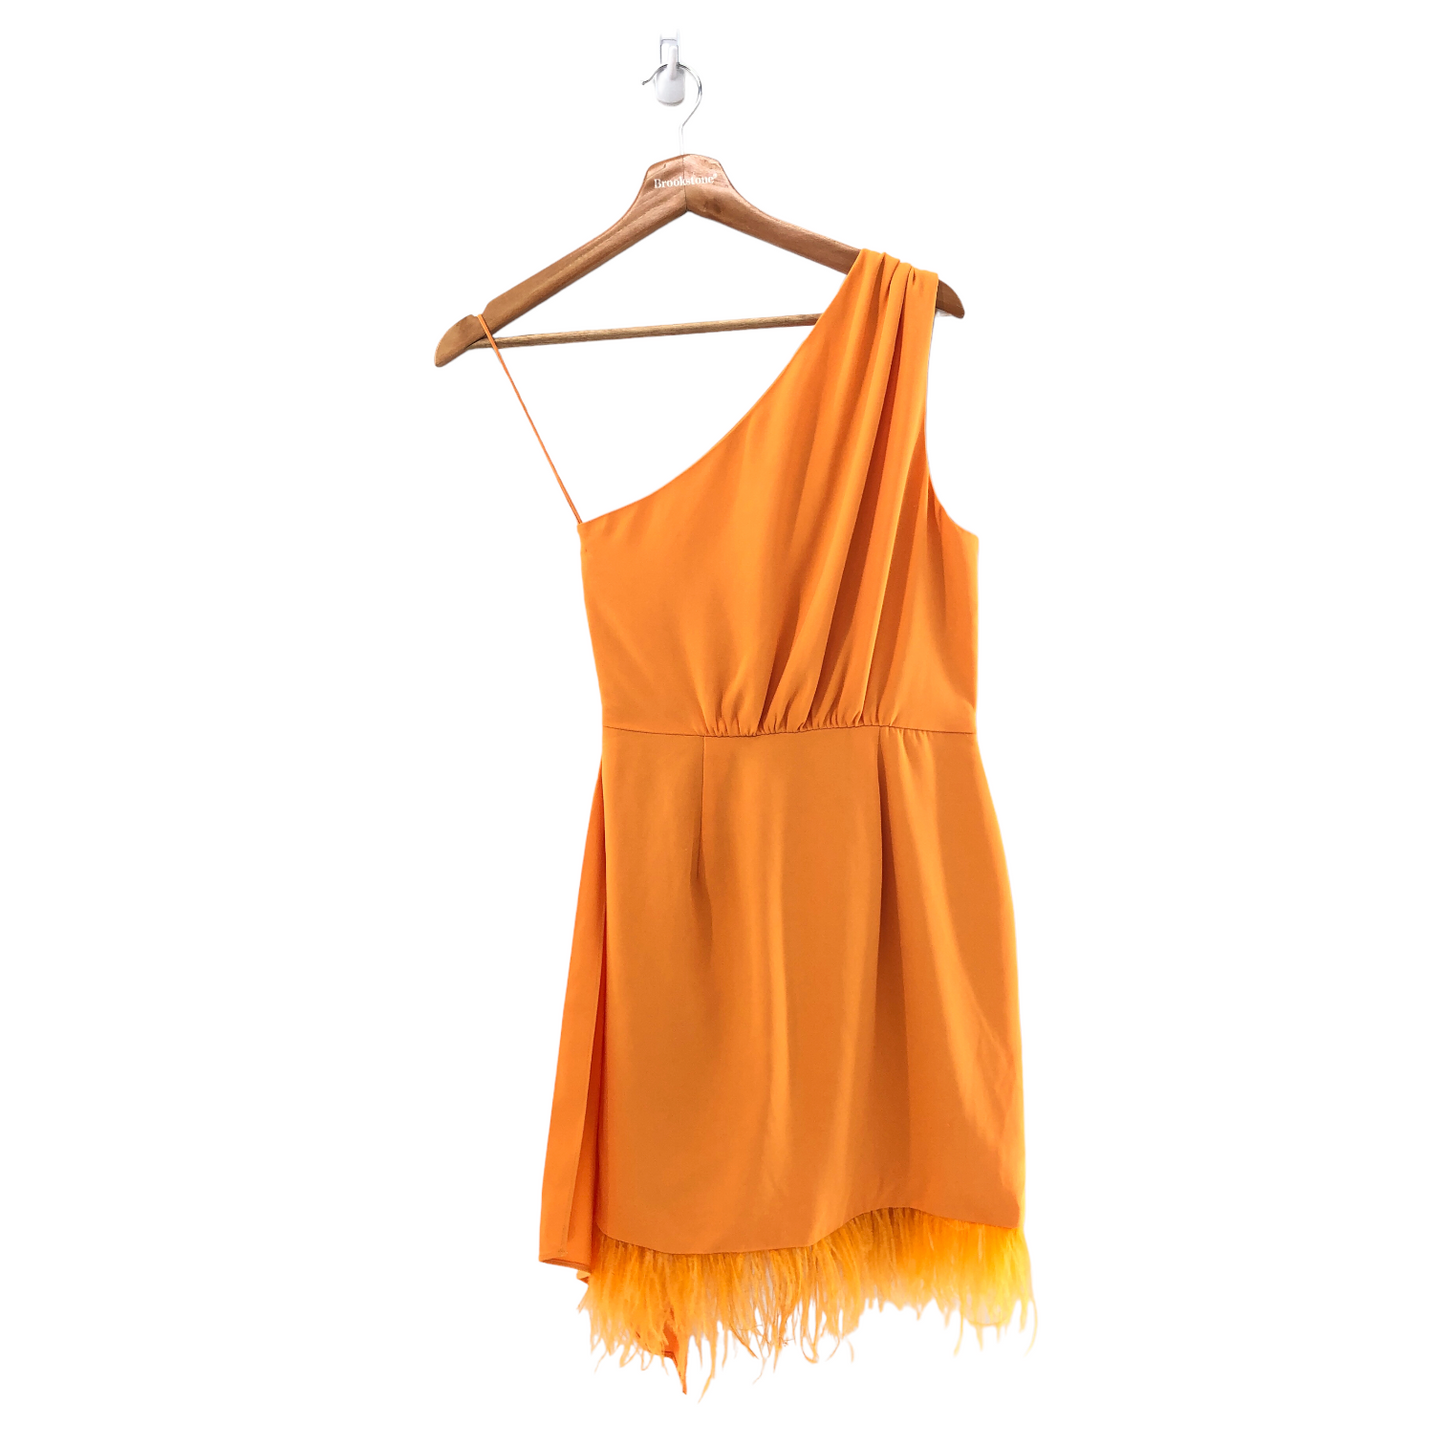 SAYLOR Audrie Dress in Marigold